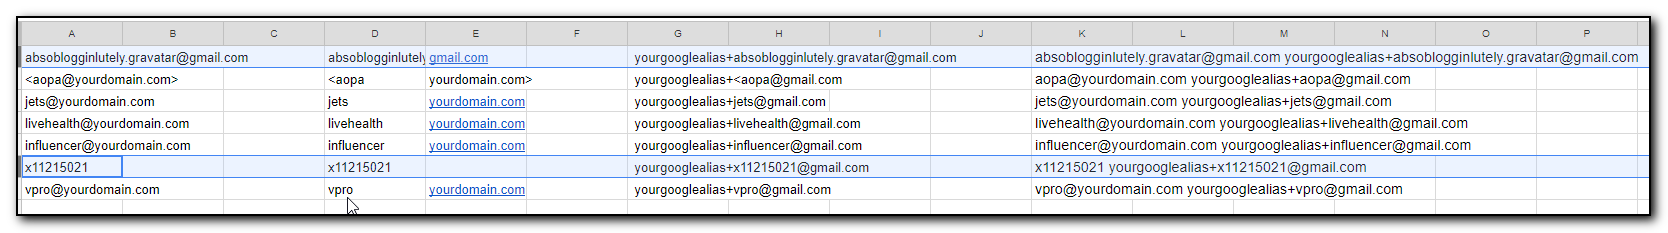 Spreadsheet of email addresses ready to paste into Dreamhost